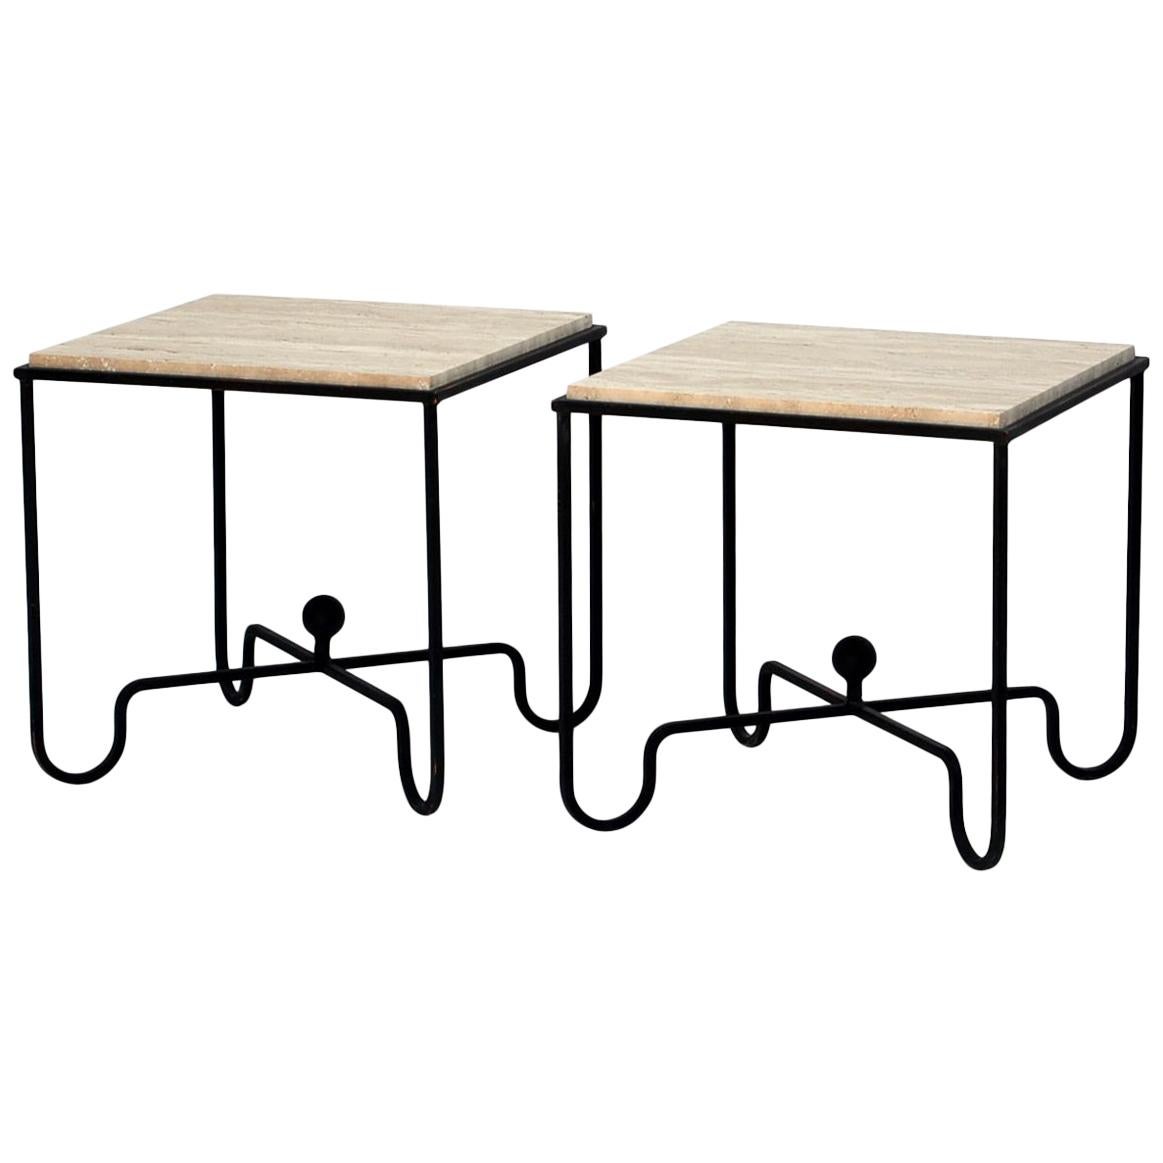 Pair of Wrought Iron and Travertine 'Entretoise' Side Tables by Design Frères For Sale